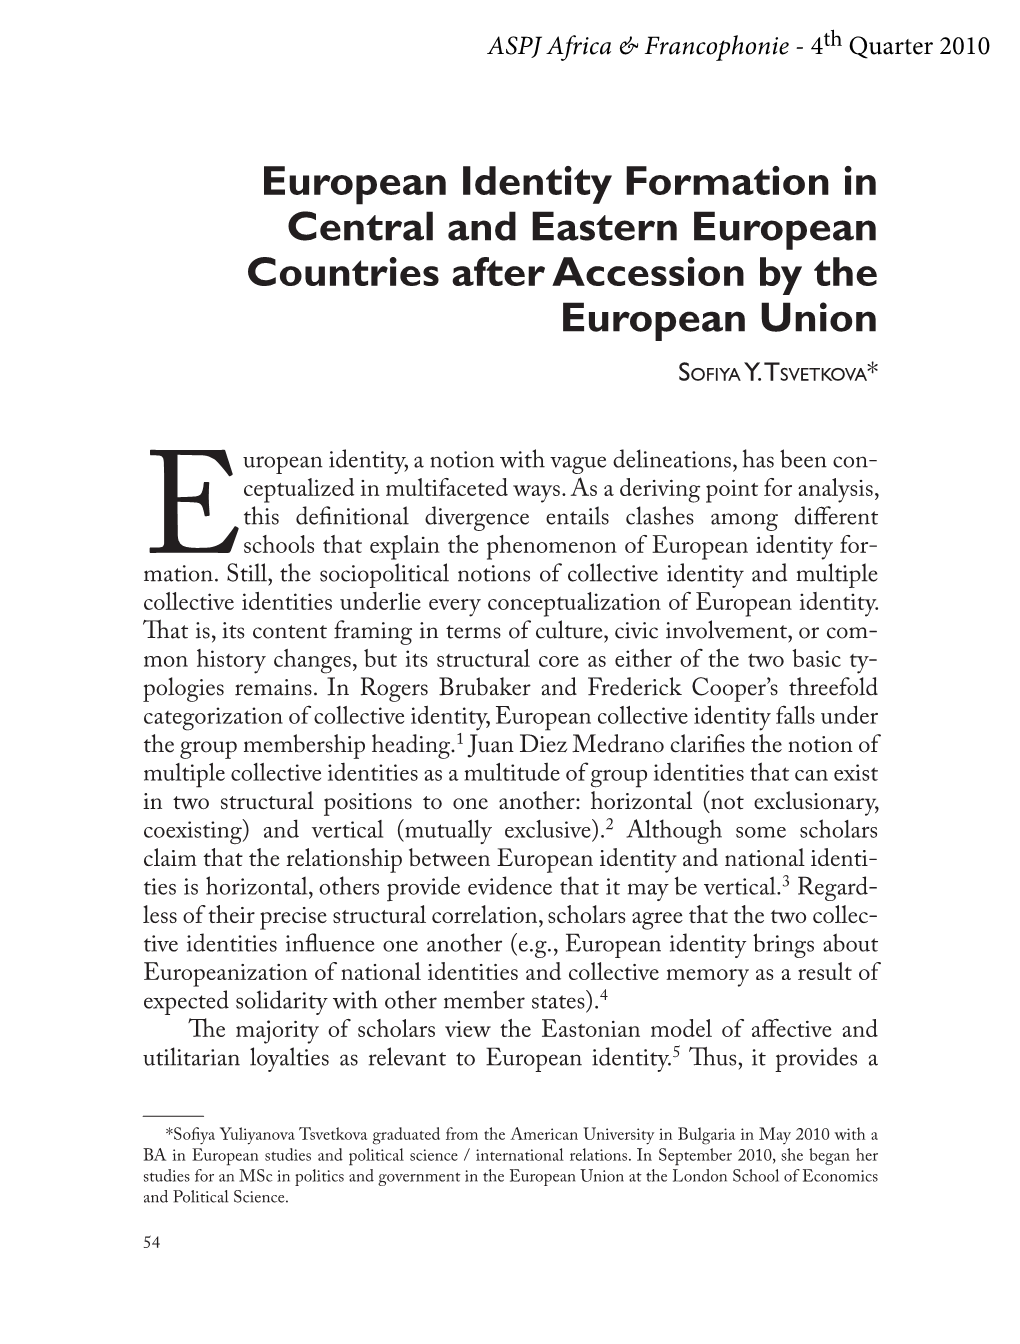 European Identity Formation in Central and Eastern European Countries After Accession by the European Union